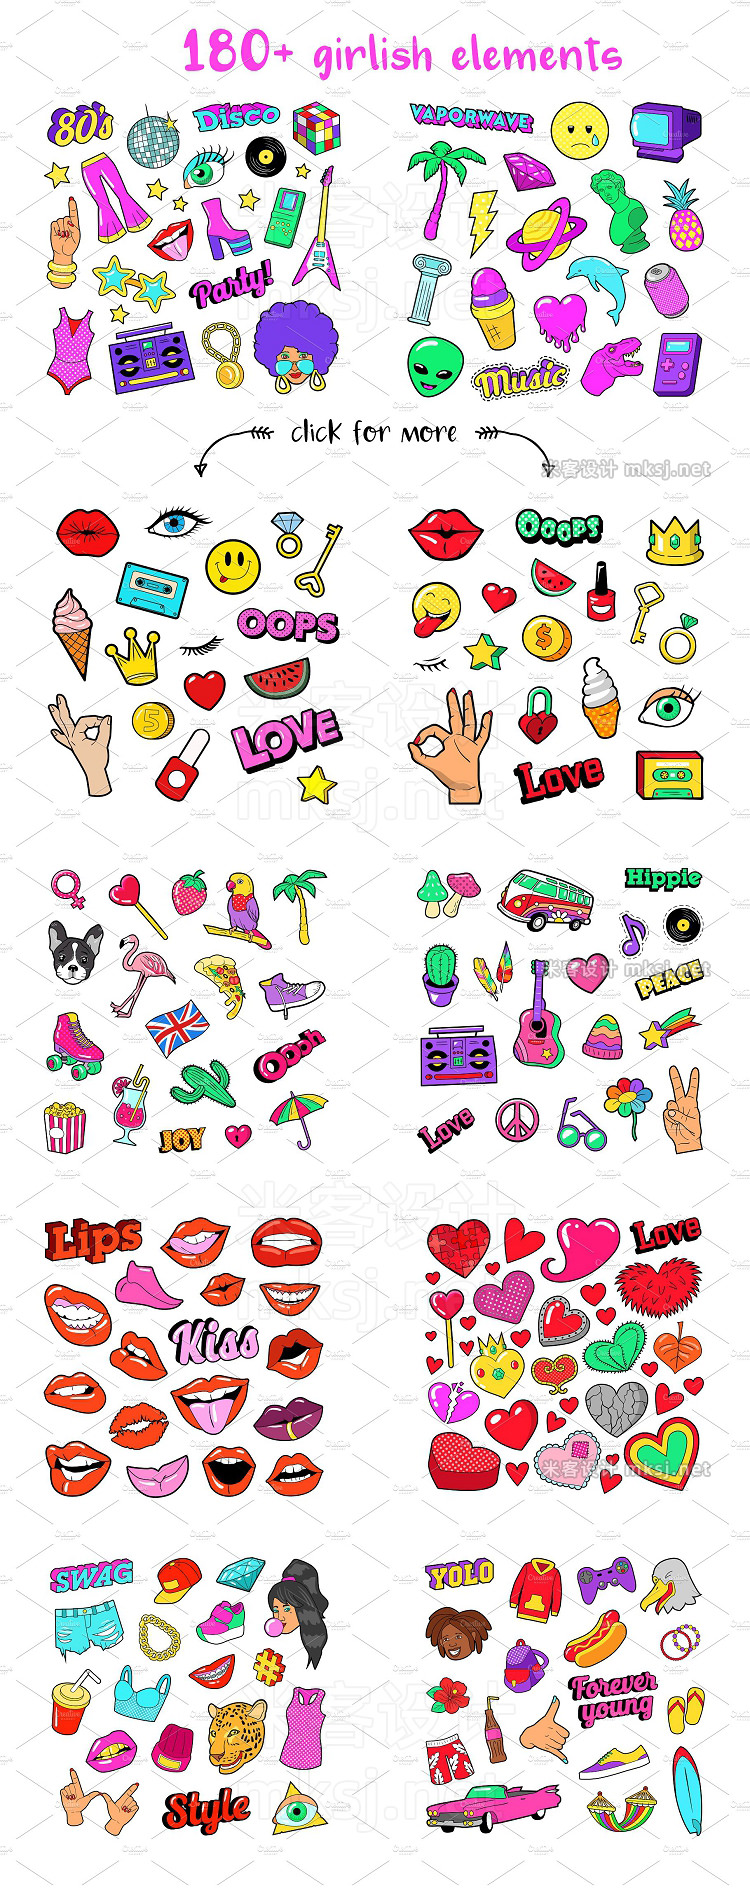 png素材 Girlish Fashion pop style clipart